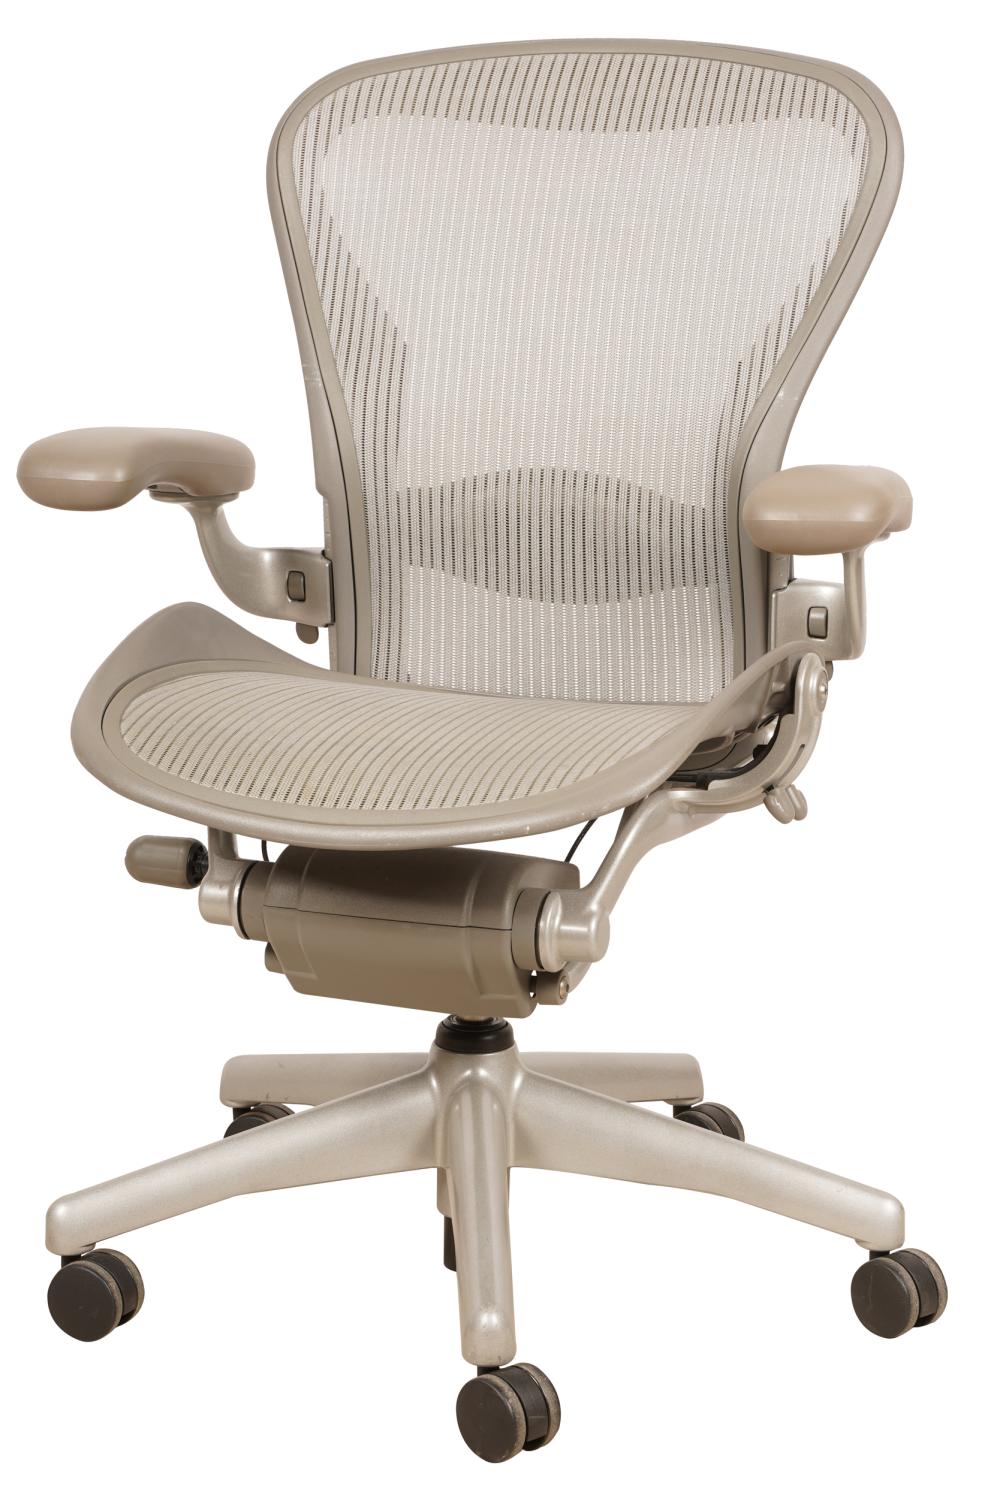 HERMAN MILLER AERON OFFICE CHAIRwith 331838